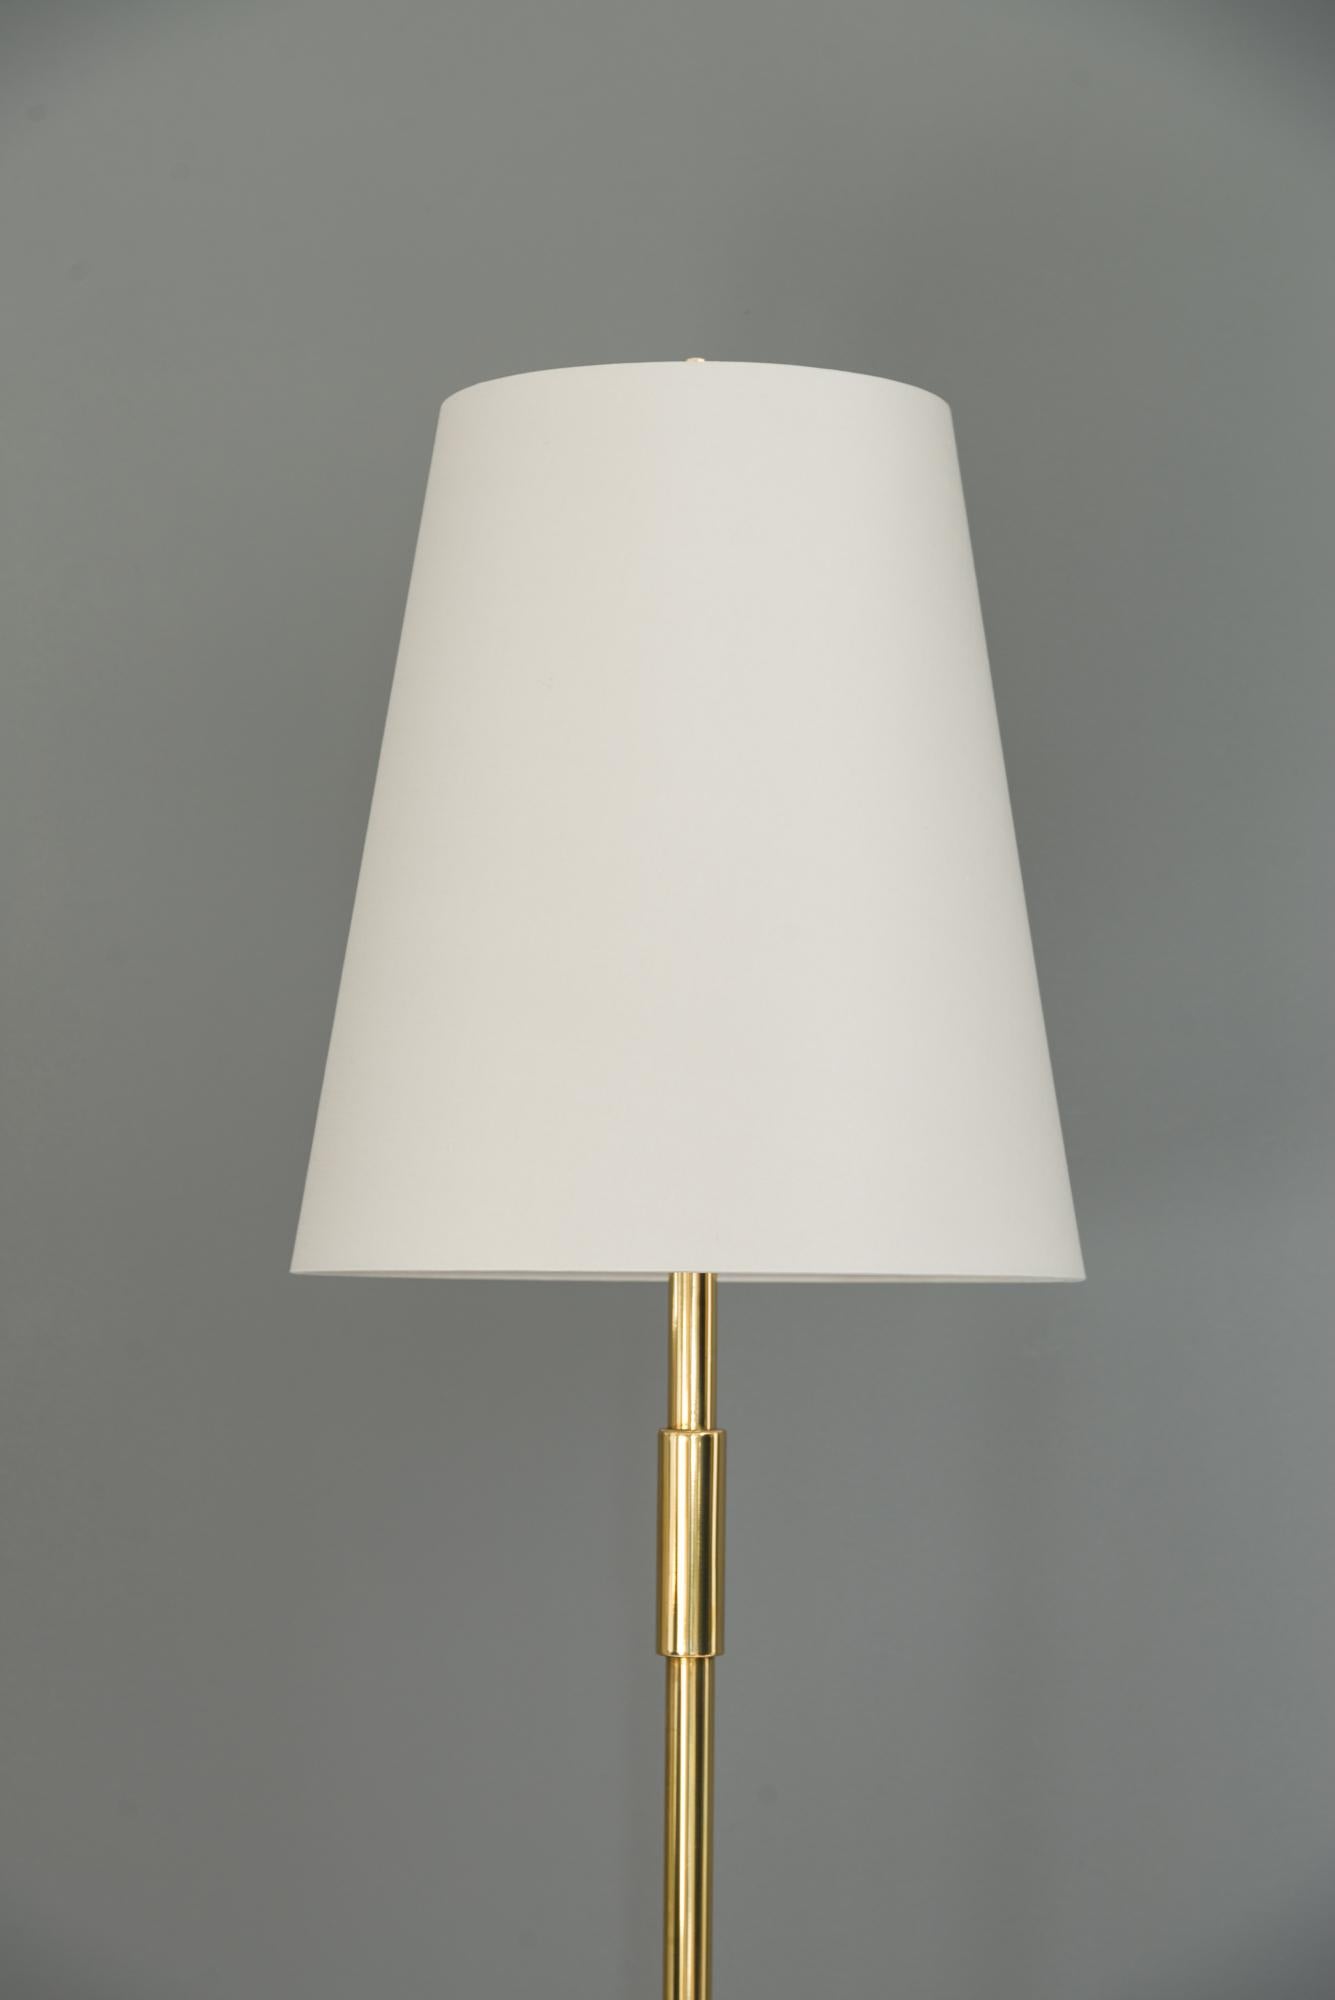 Adjustable Viennese floor lamp circa 1950s
Brass polished and stove enameled
The shade is replaced ( new )
Meaures: High adjustable from 170cm - to 190cm.